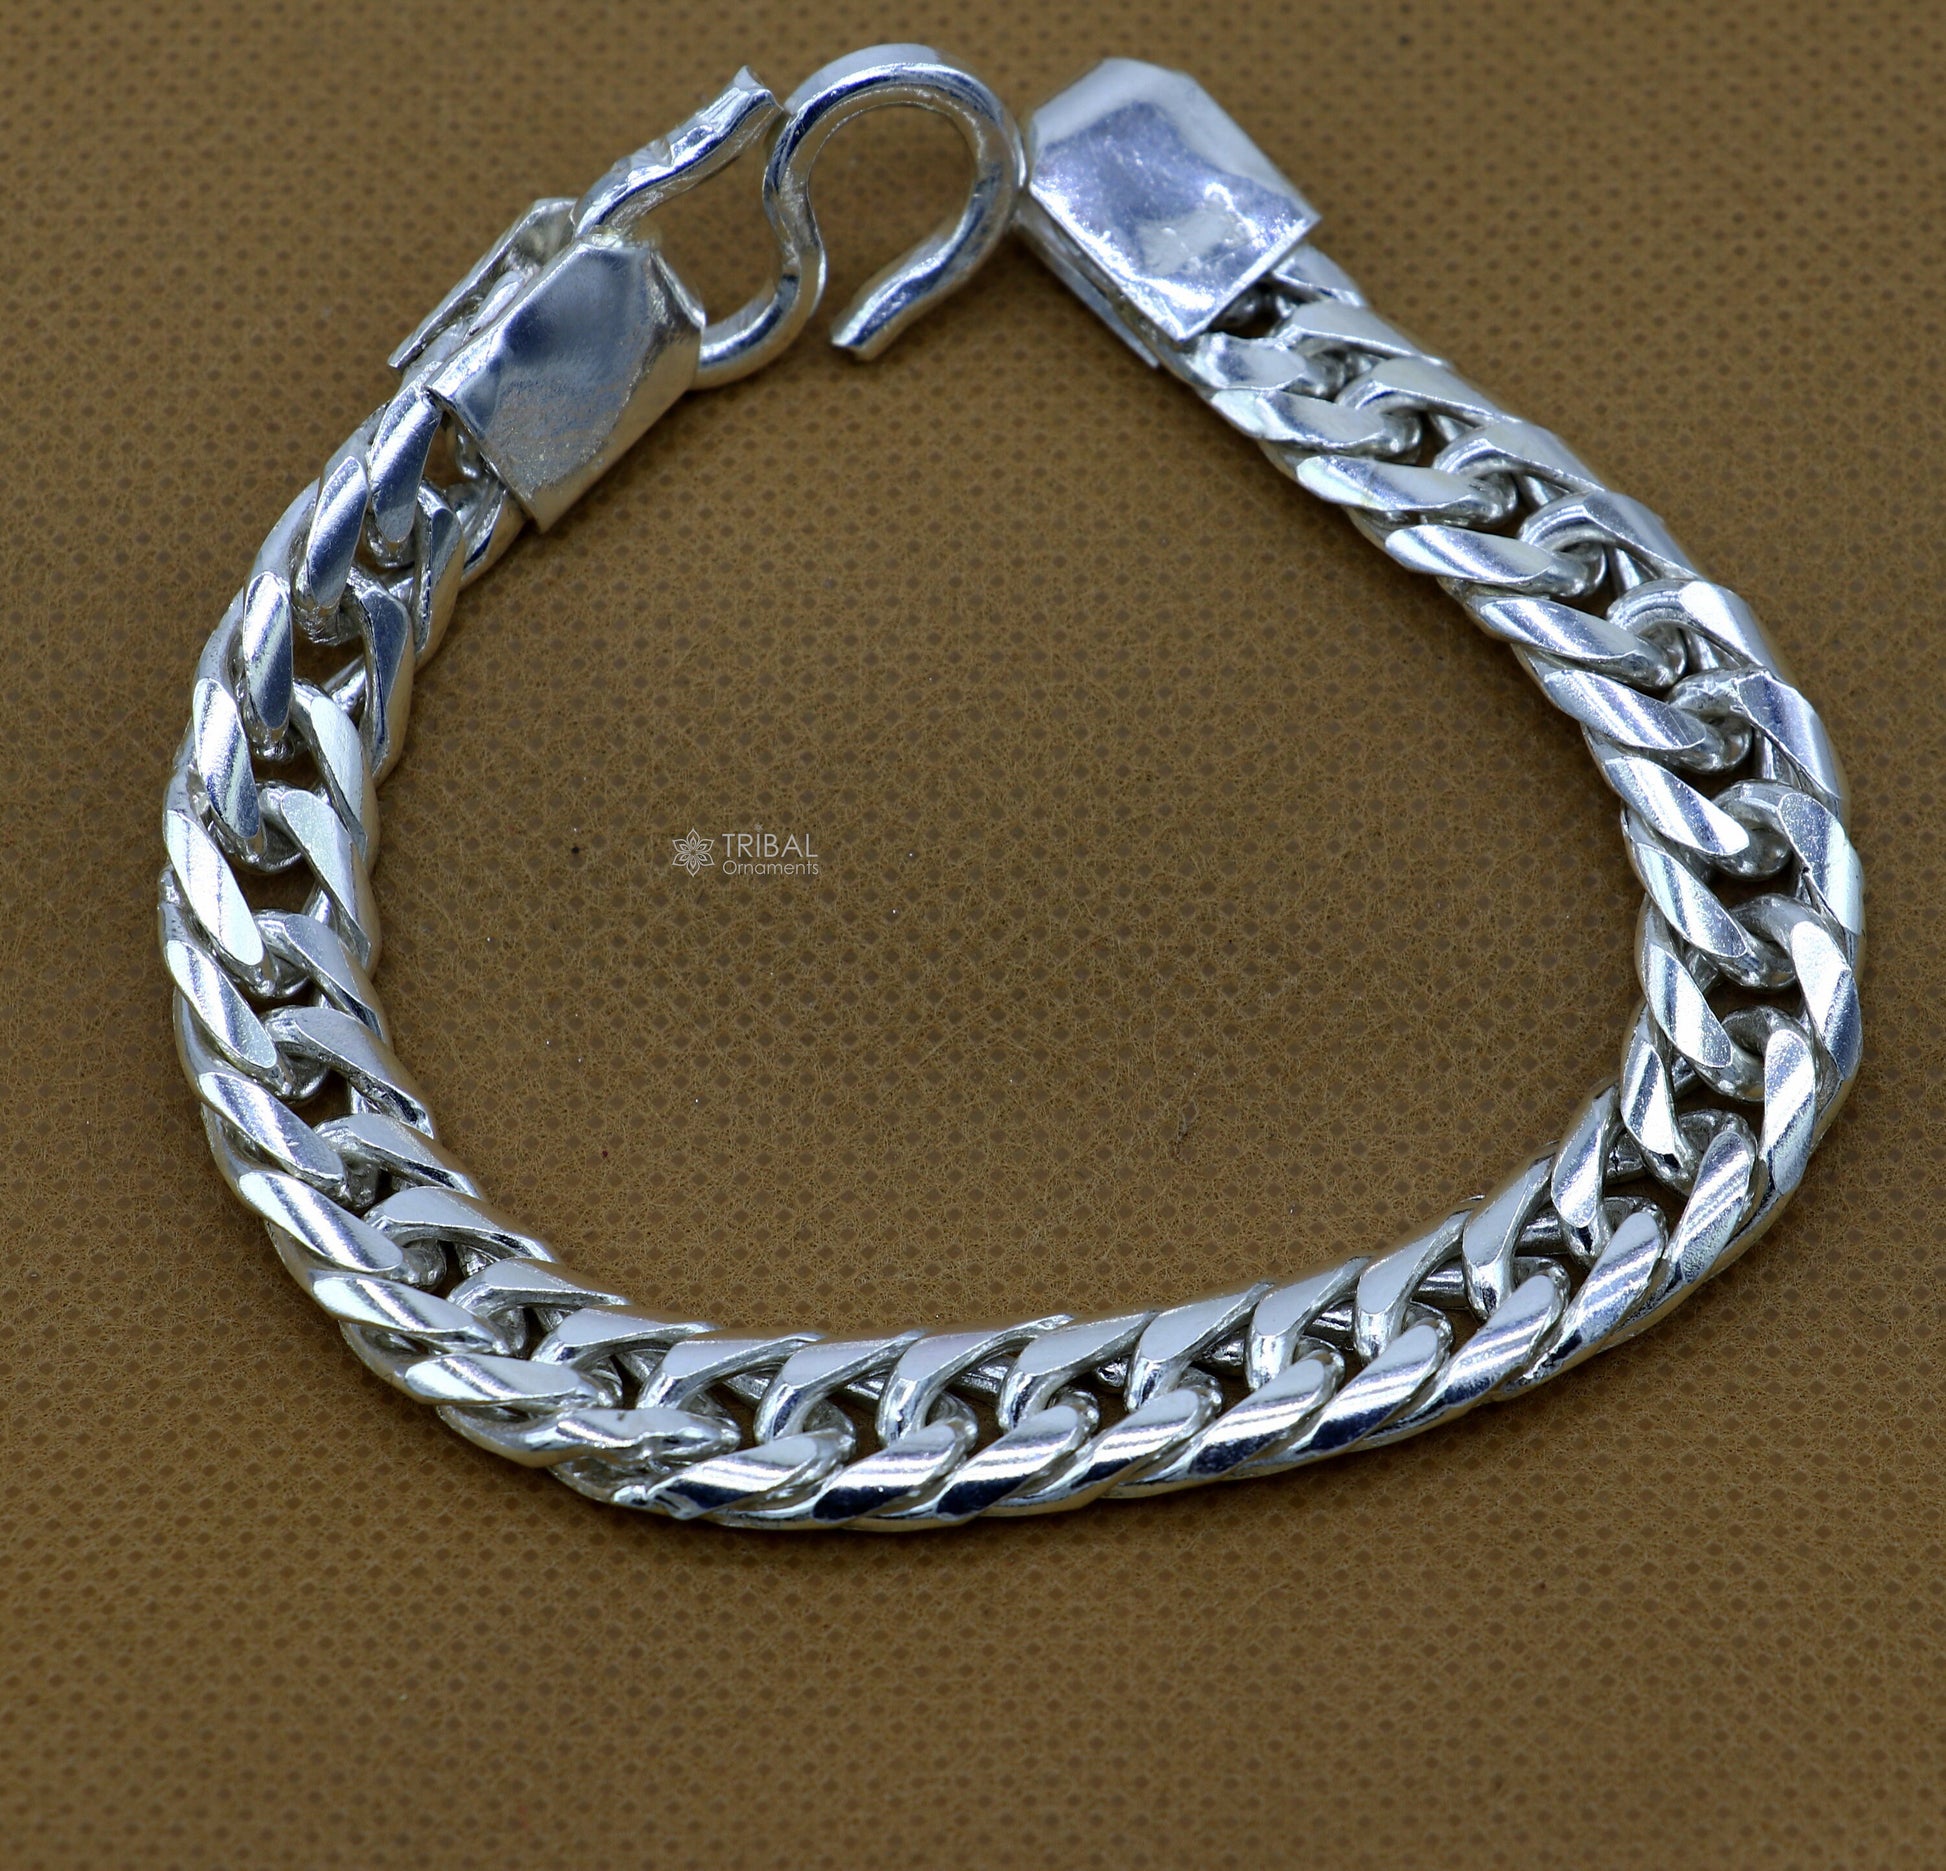 10mm 925 sterling silver handmade unique customized design heavy men's bracelet, Amazing oxidized personalized gifting royal jewelry sbr725 - TRIBAL ORNAMENTS